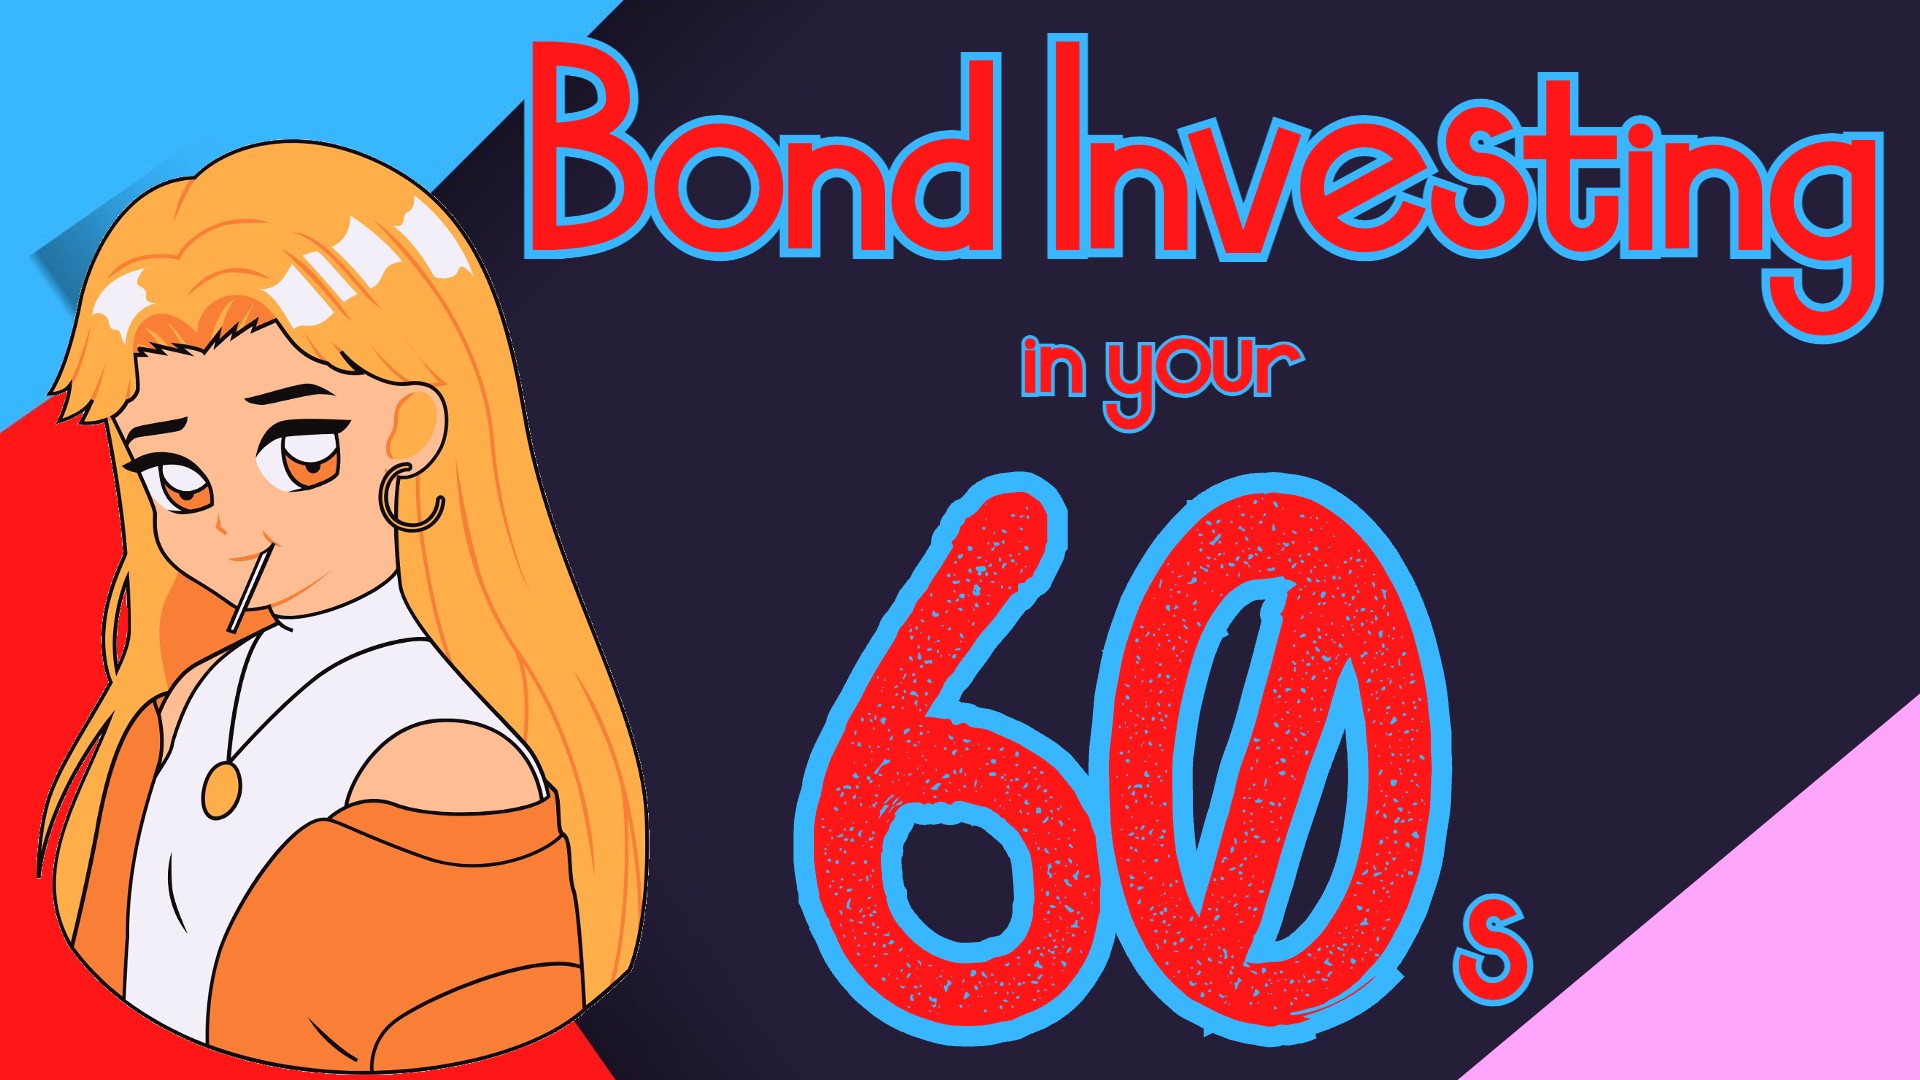 Bond Investing in Your 60s